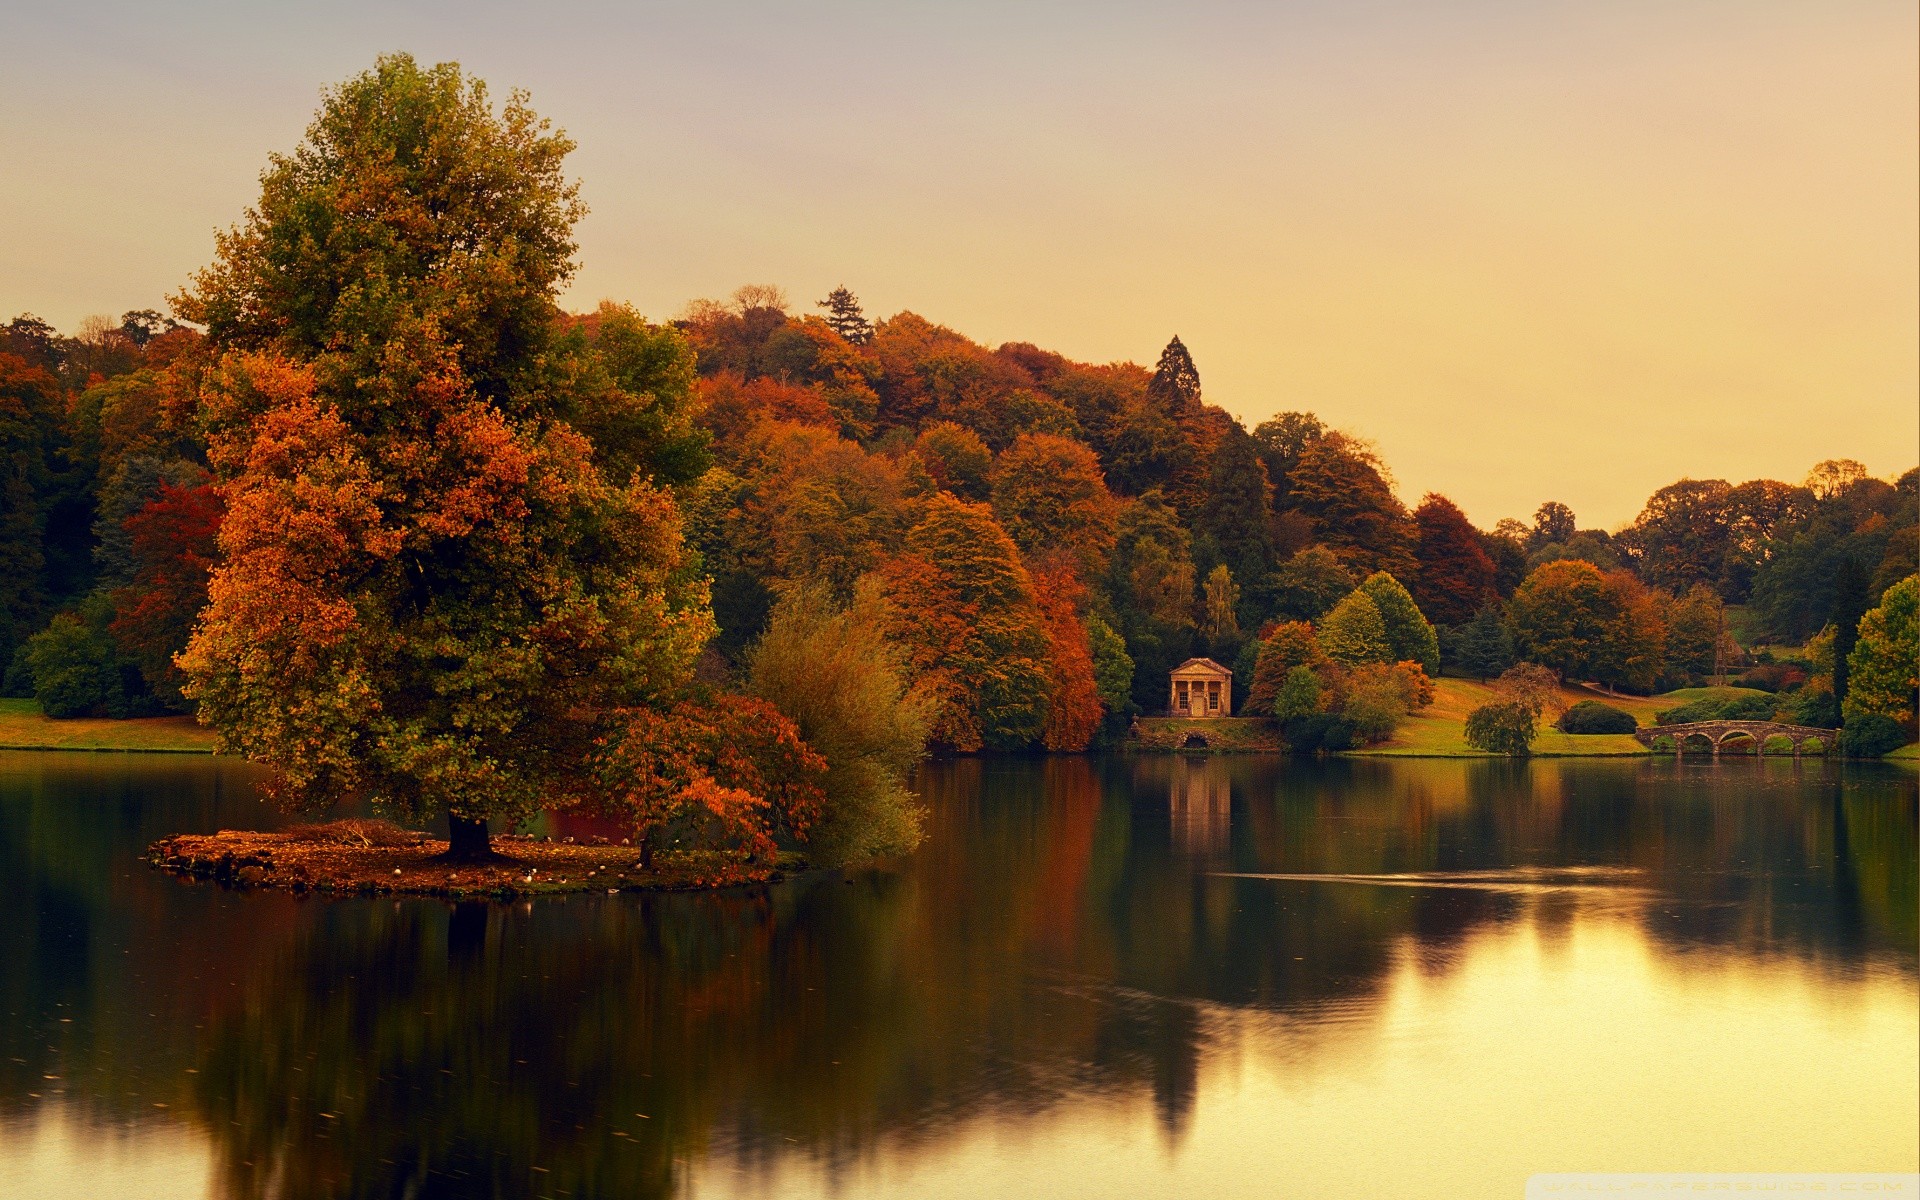 General 1920x1200 England nature landscape trees water river house bridge sunset fall